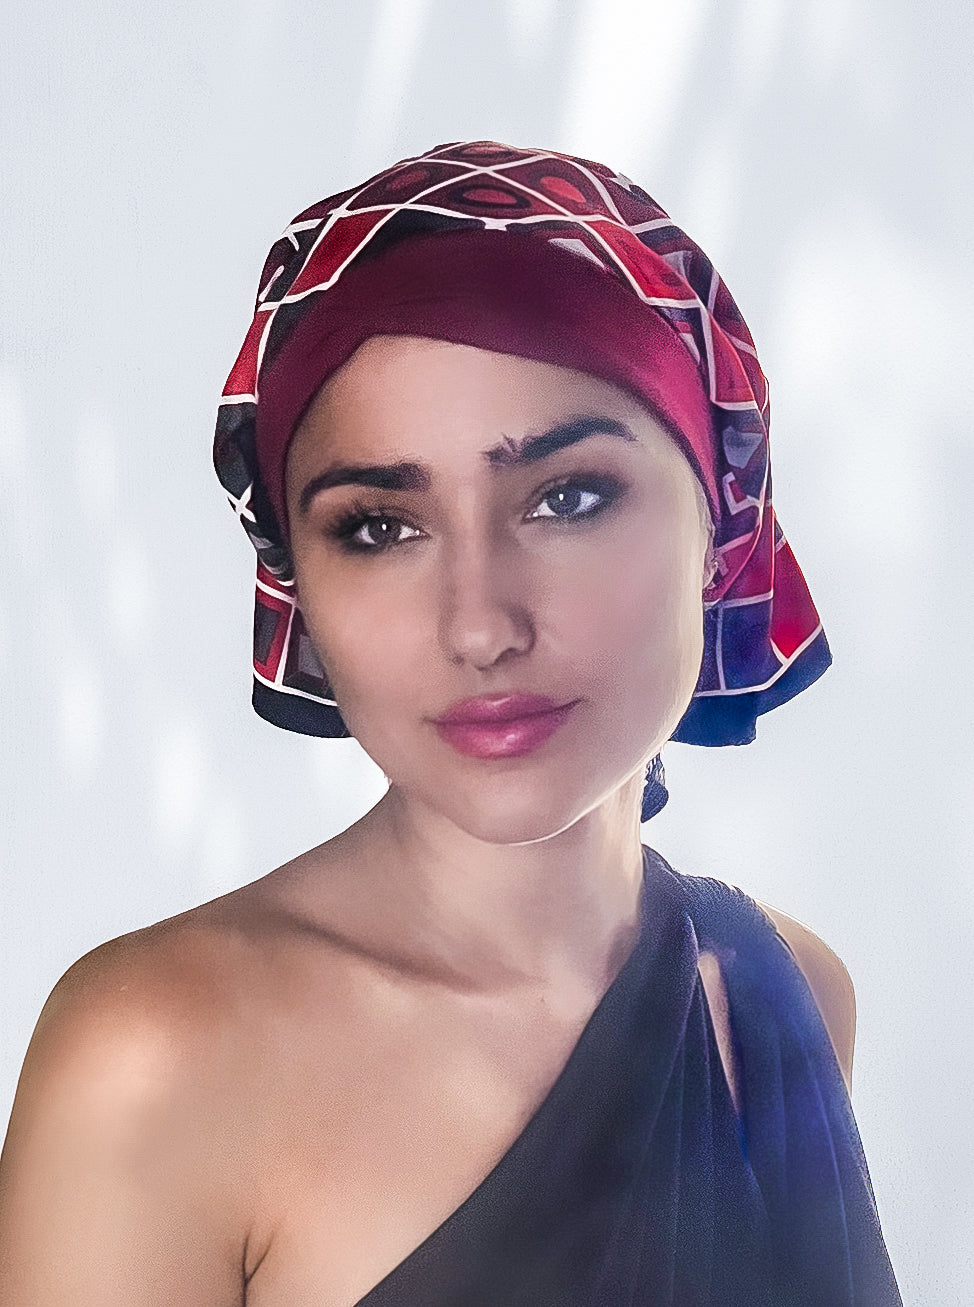 beautiful woman wearing a fashionable headscarf, of ruby red and black with geometric shapes , in the retro kerchief style, designed specifically for those experiencing hair loss